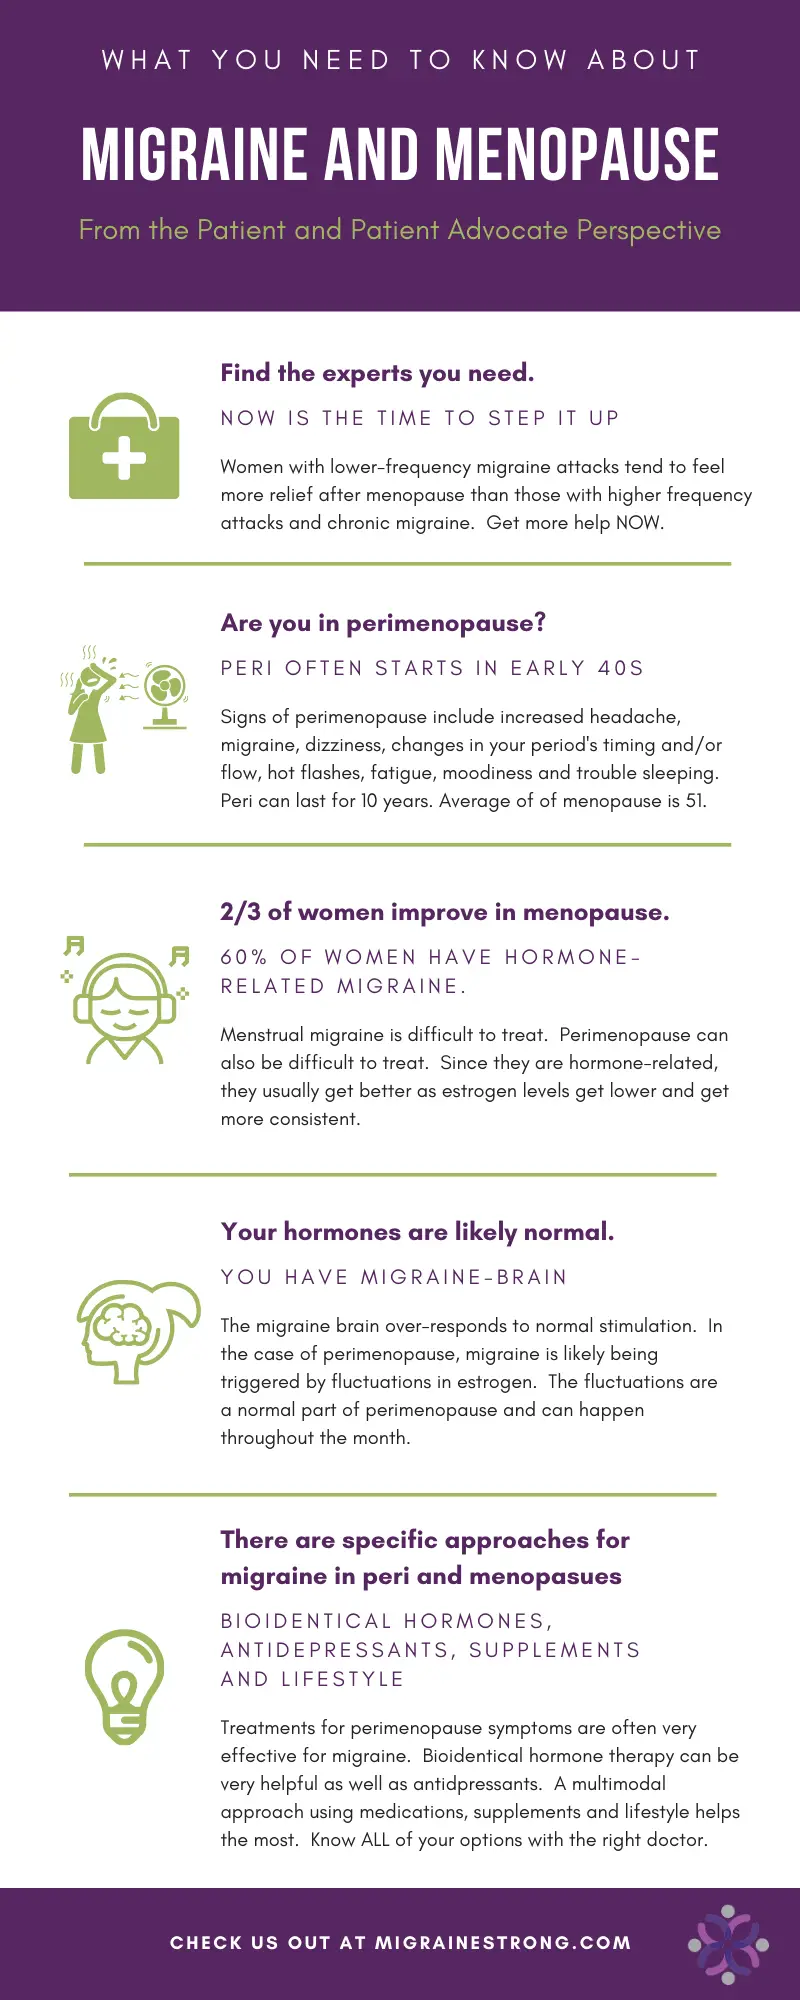 What No One Tells You about Migraines and Menopause (and Perimenopause Too)